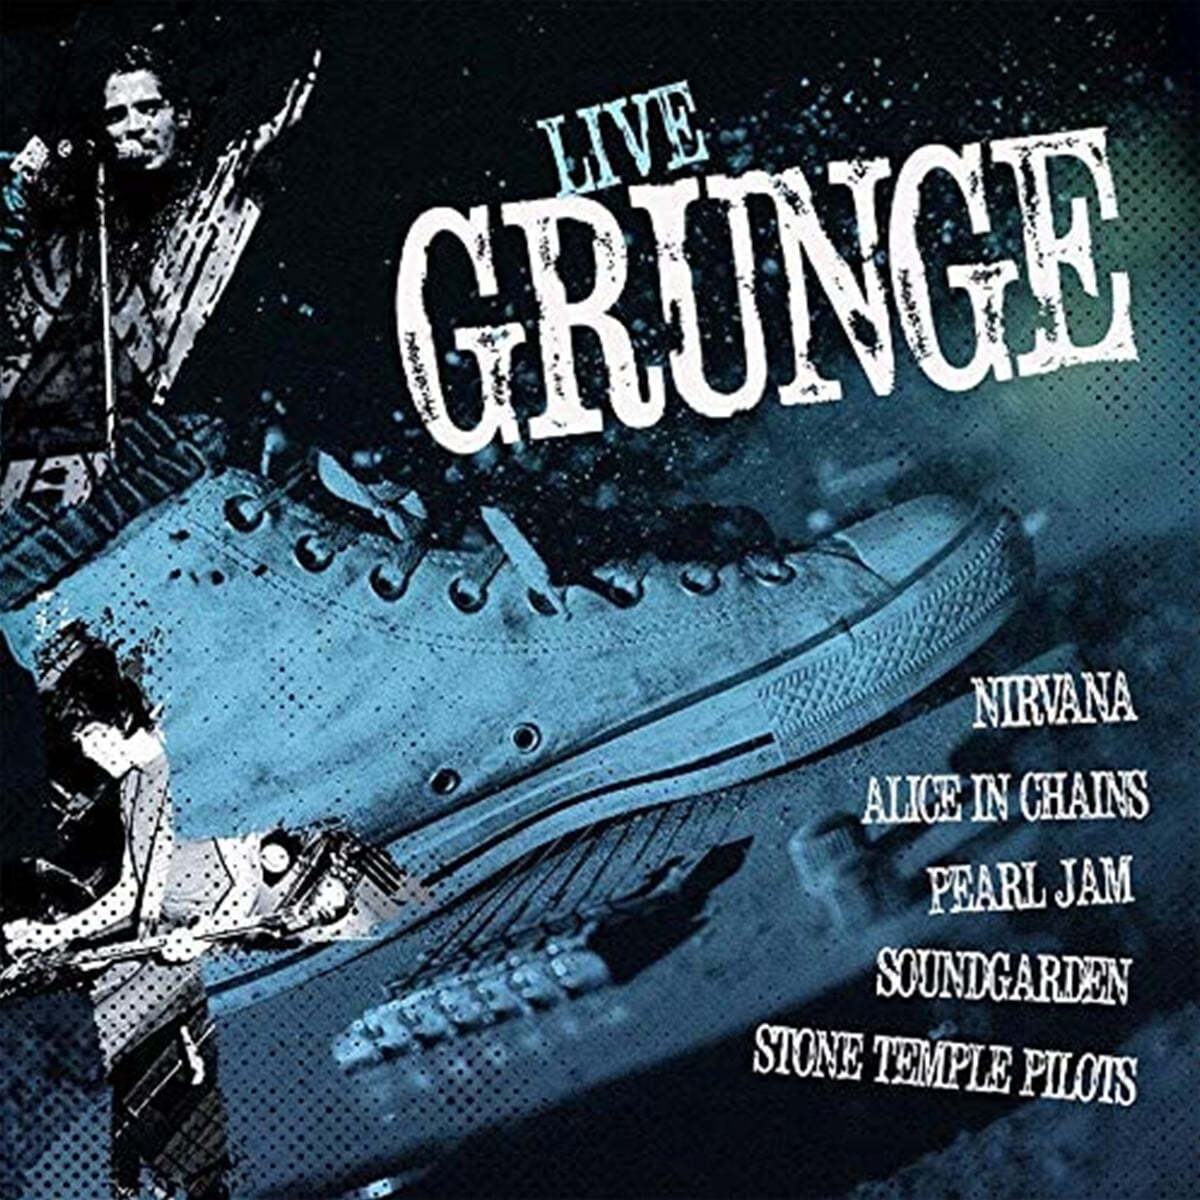 Nirvana / Alice in Chains / Soundgarden / Pearl Jam / Stone Temple Pilots - Live Grunge [5LP] 